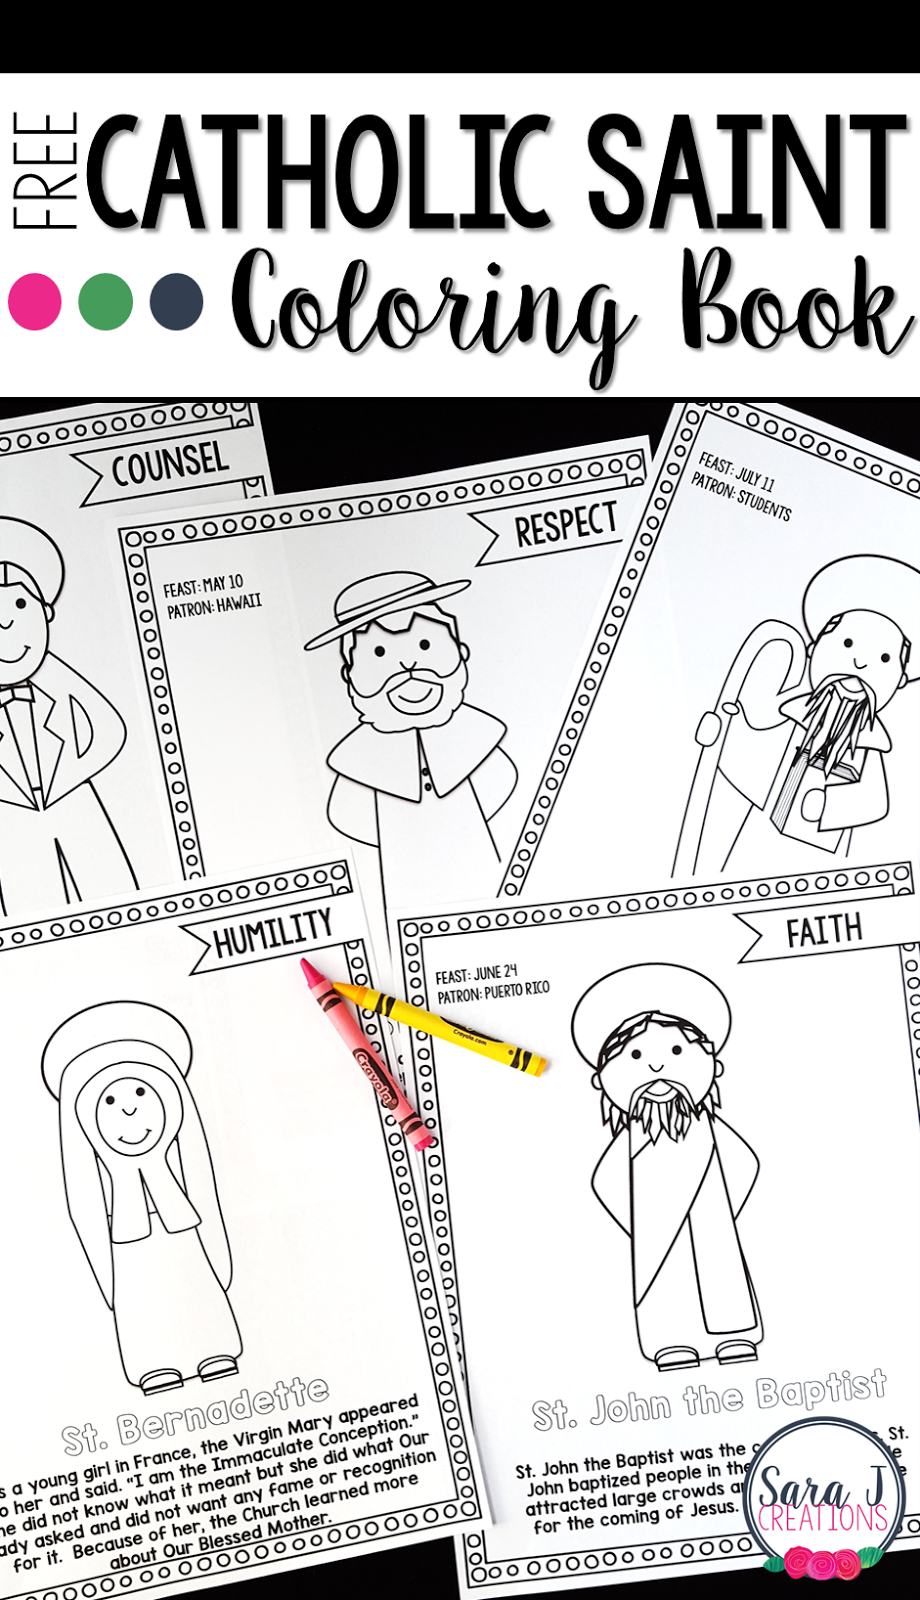 Catholic Saints Coloring Book FREE sample Great way to teach the virtues through the